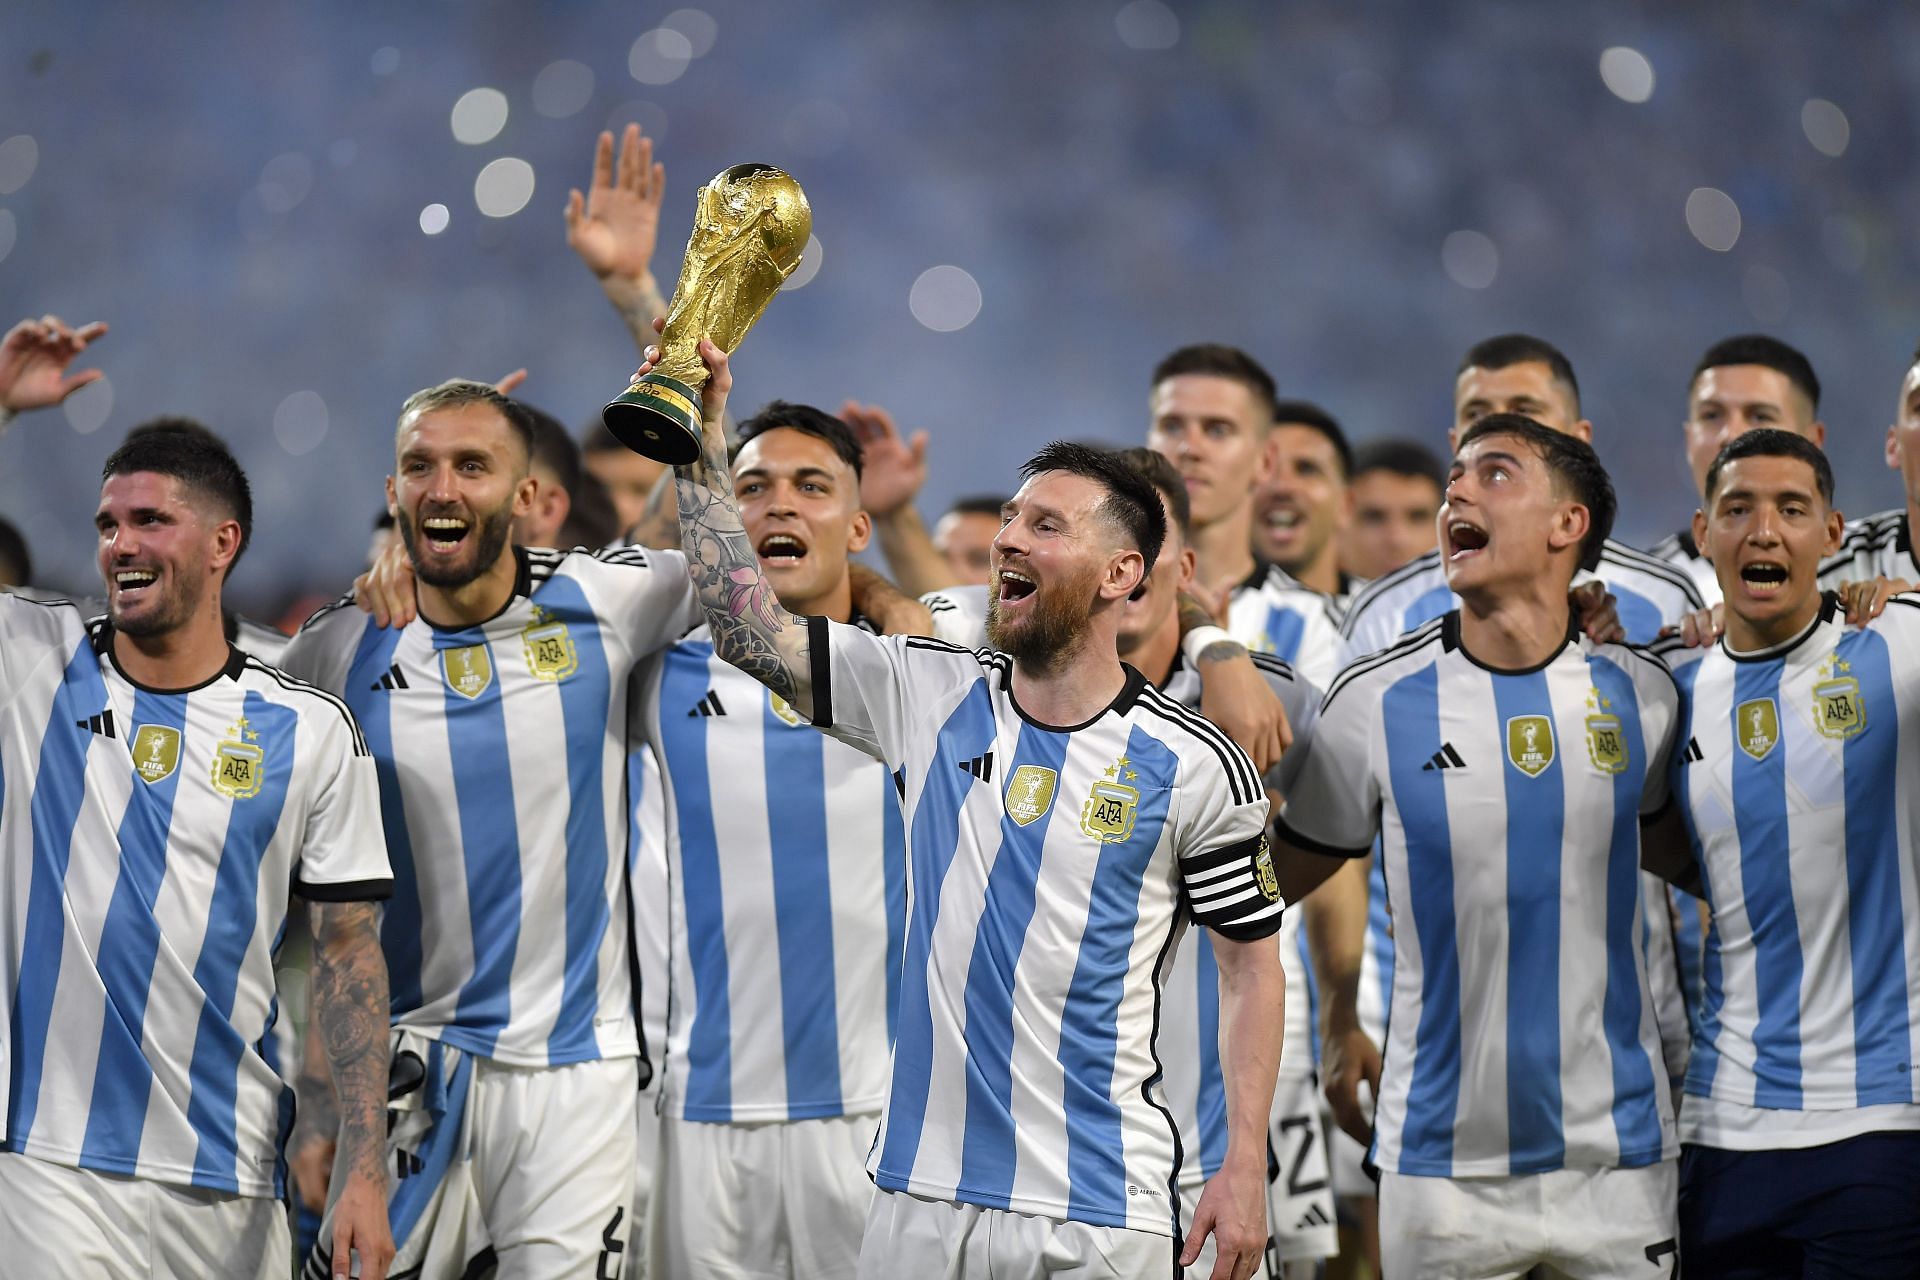 Messi displays the World Cup trophy to the fans